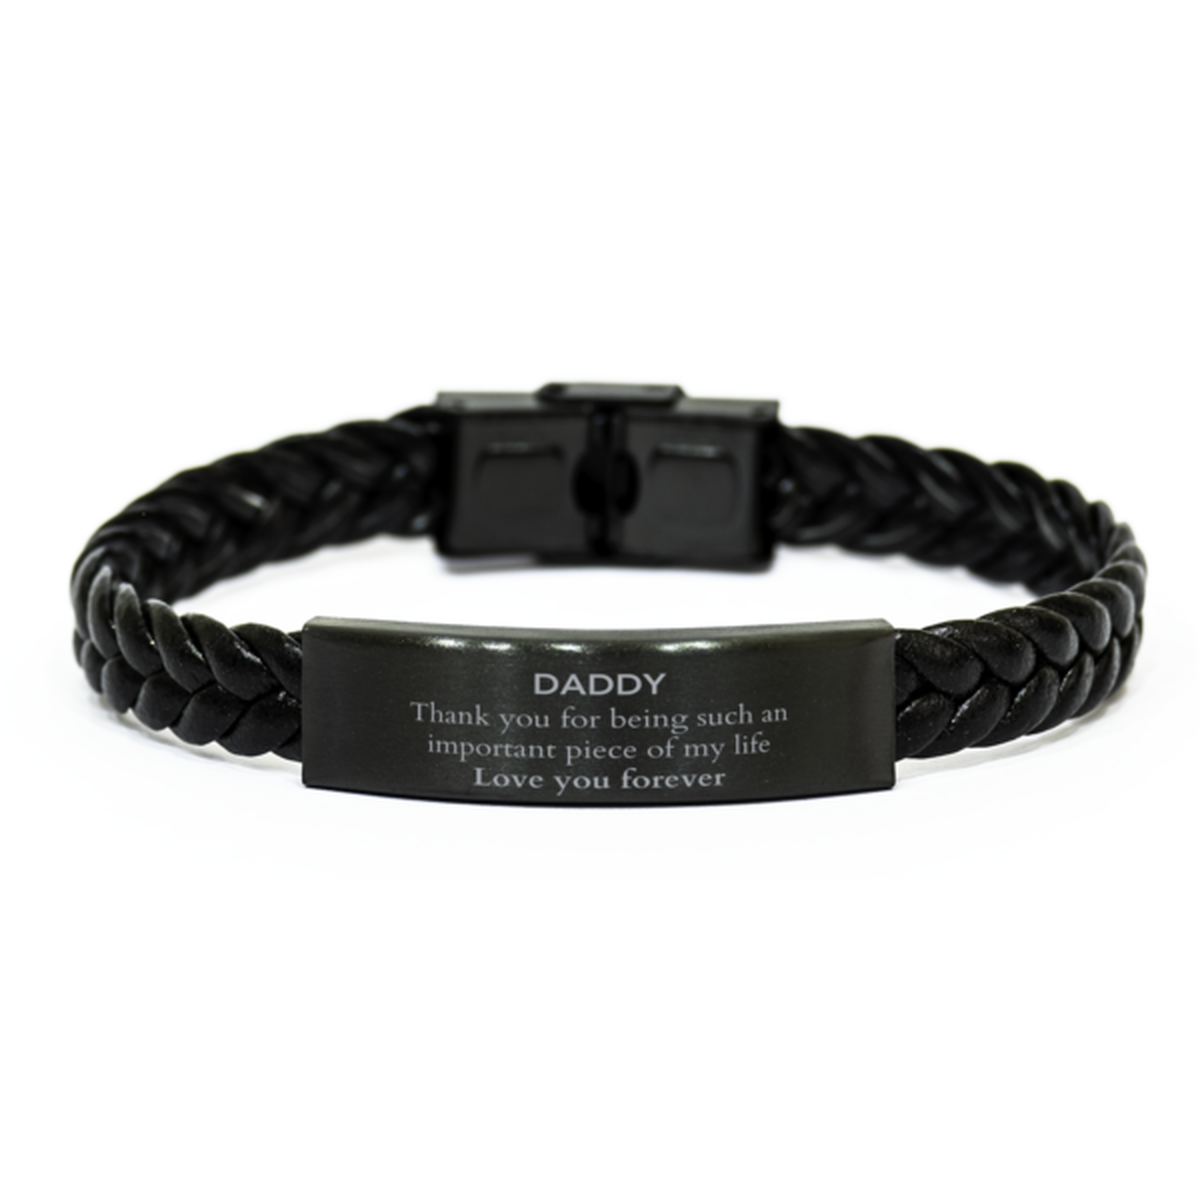 Appropriate Daddy Braided Leather Bracelet Epic Birthday Gifts for Daddy Thank you for being such an important piece of my life Daddy Christmas Mothers Fathers Day